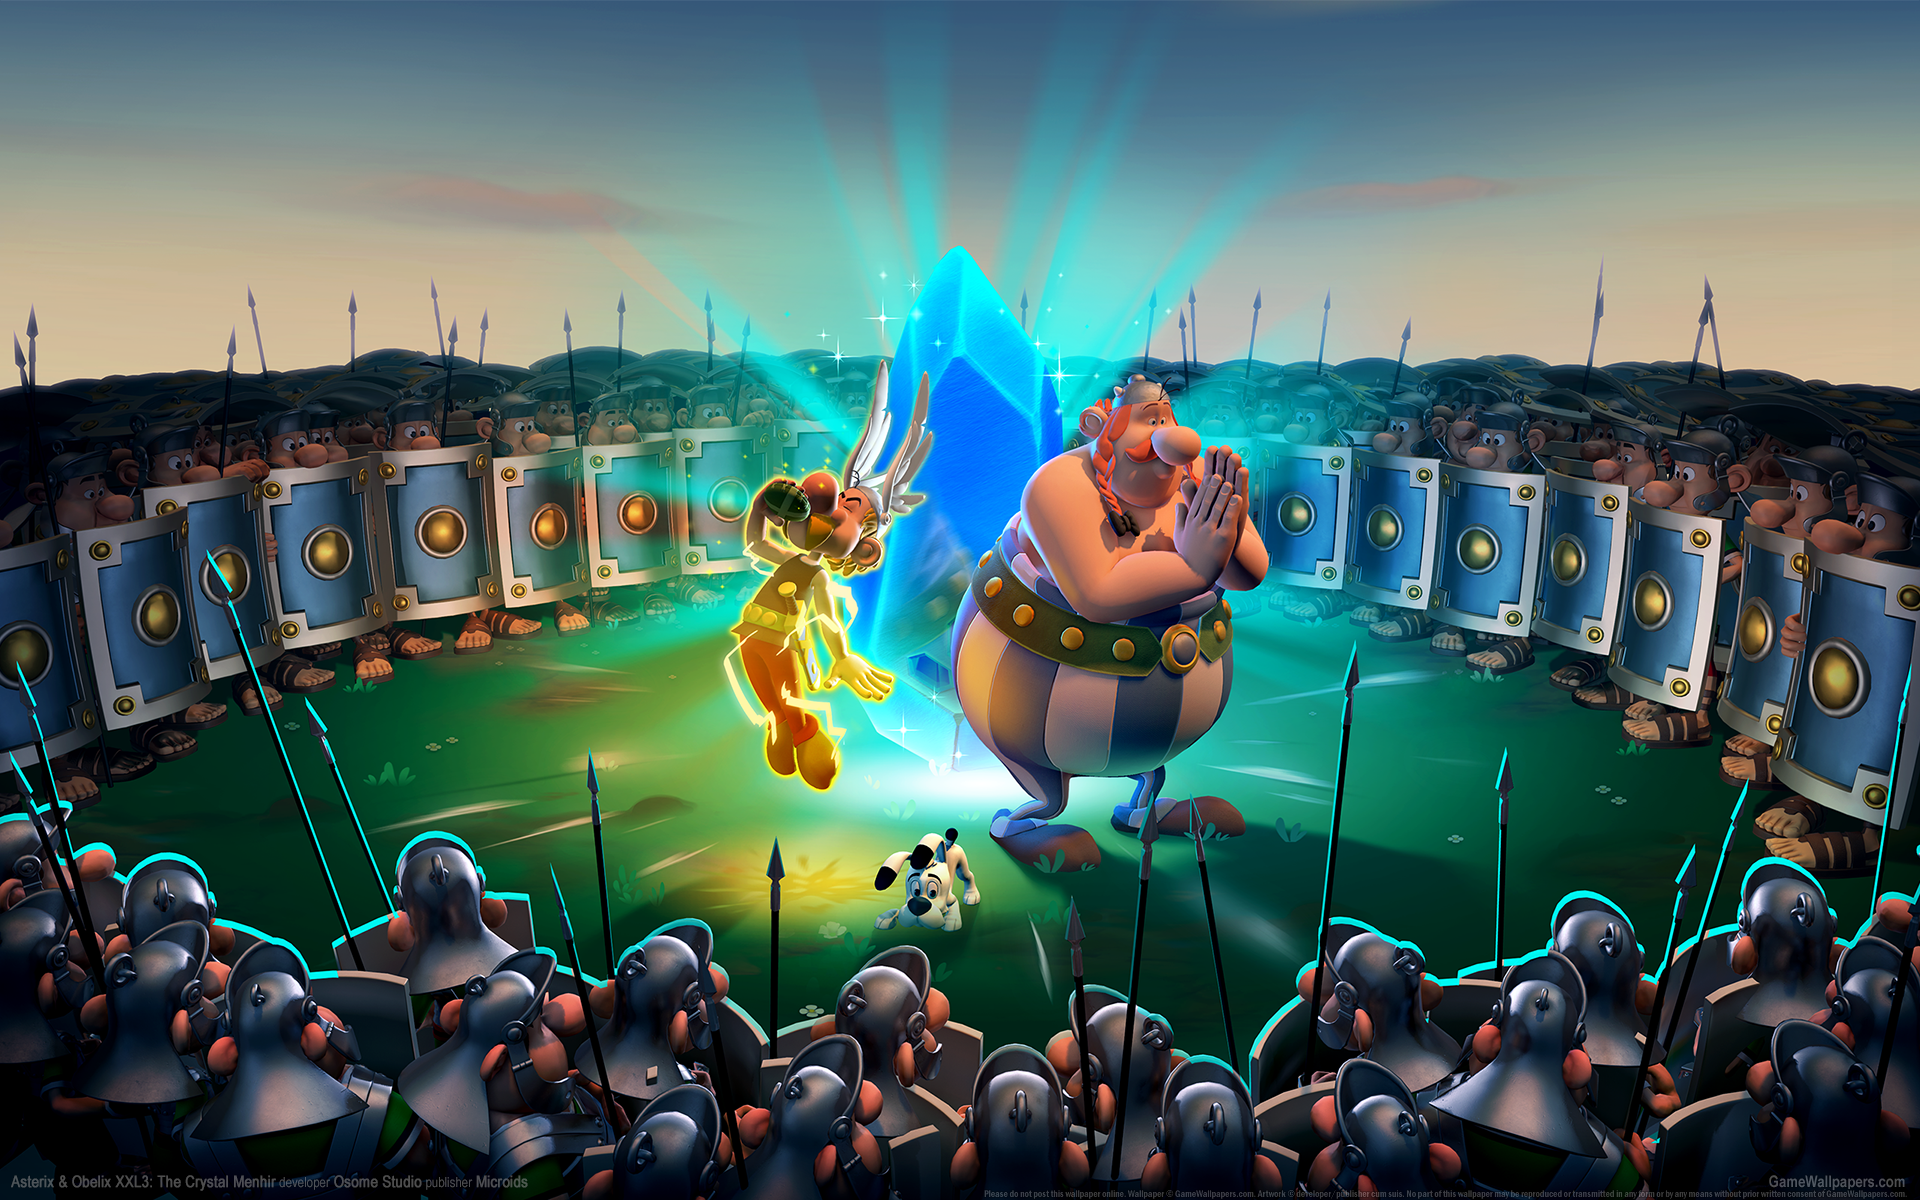 Asterix & Obelix XXL3: The Crystal Menhir 1920x1200 wallpaper or background 01